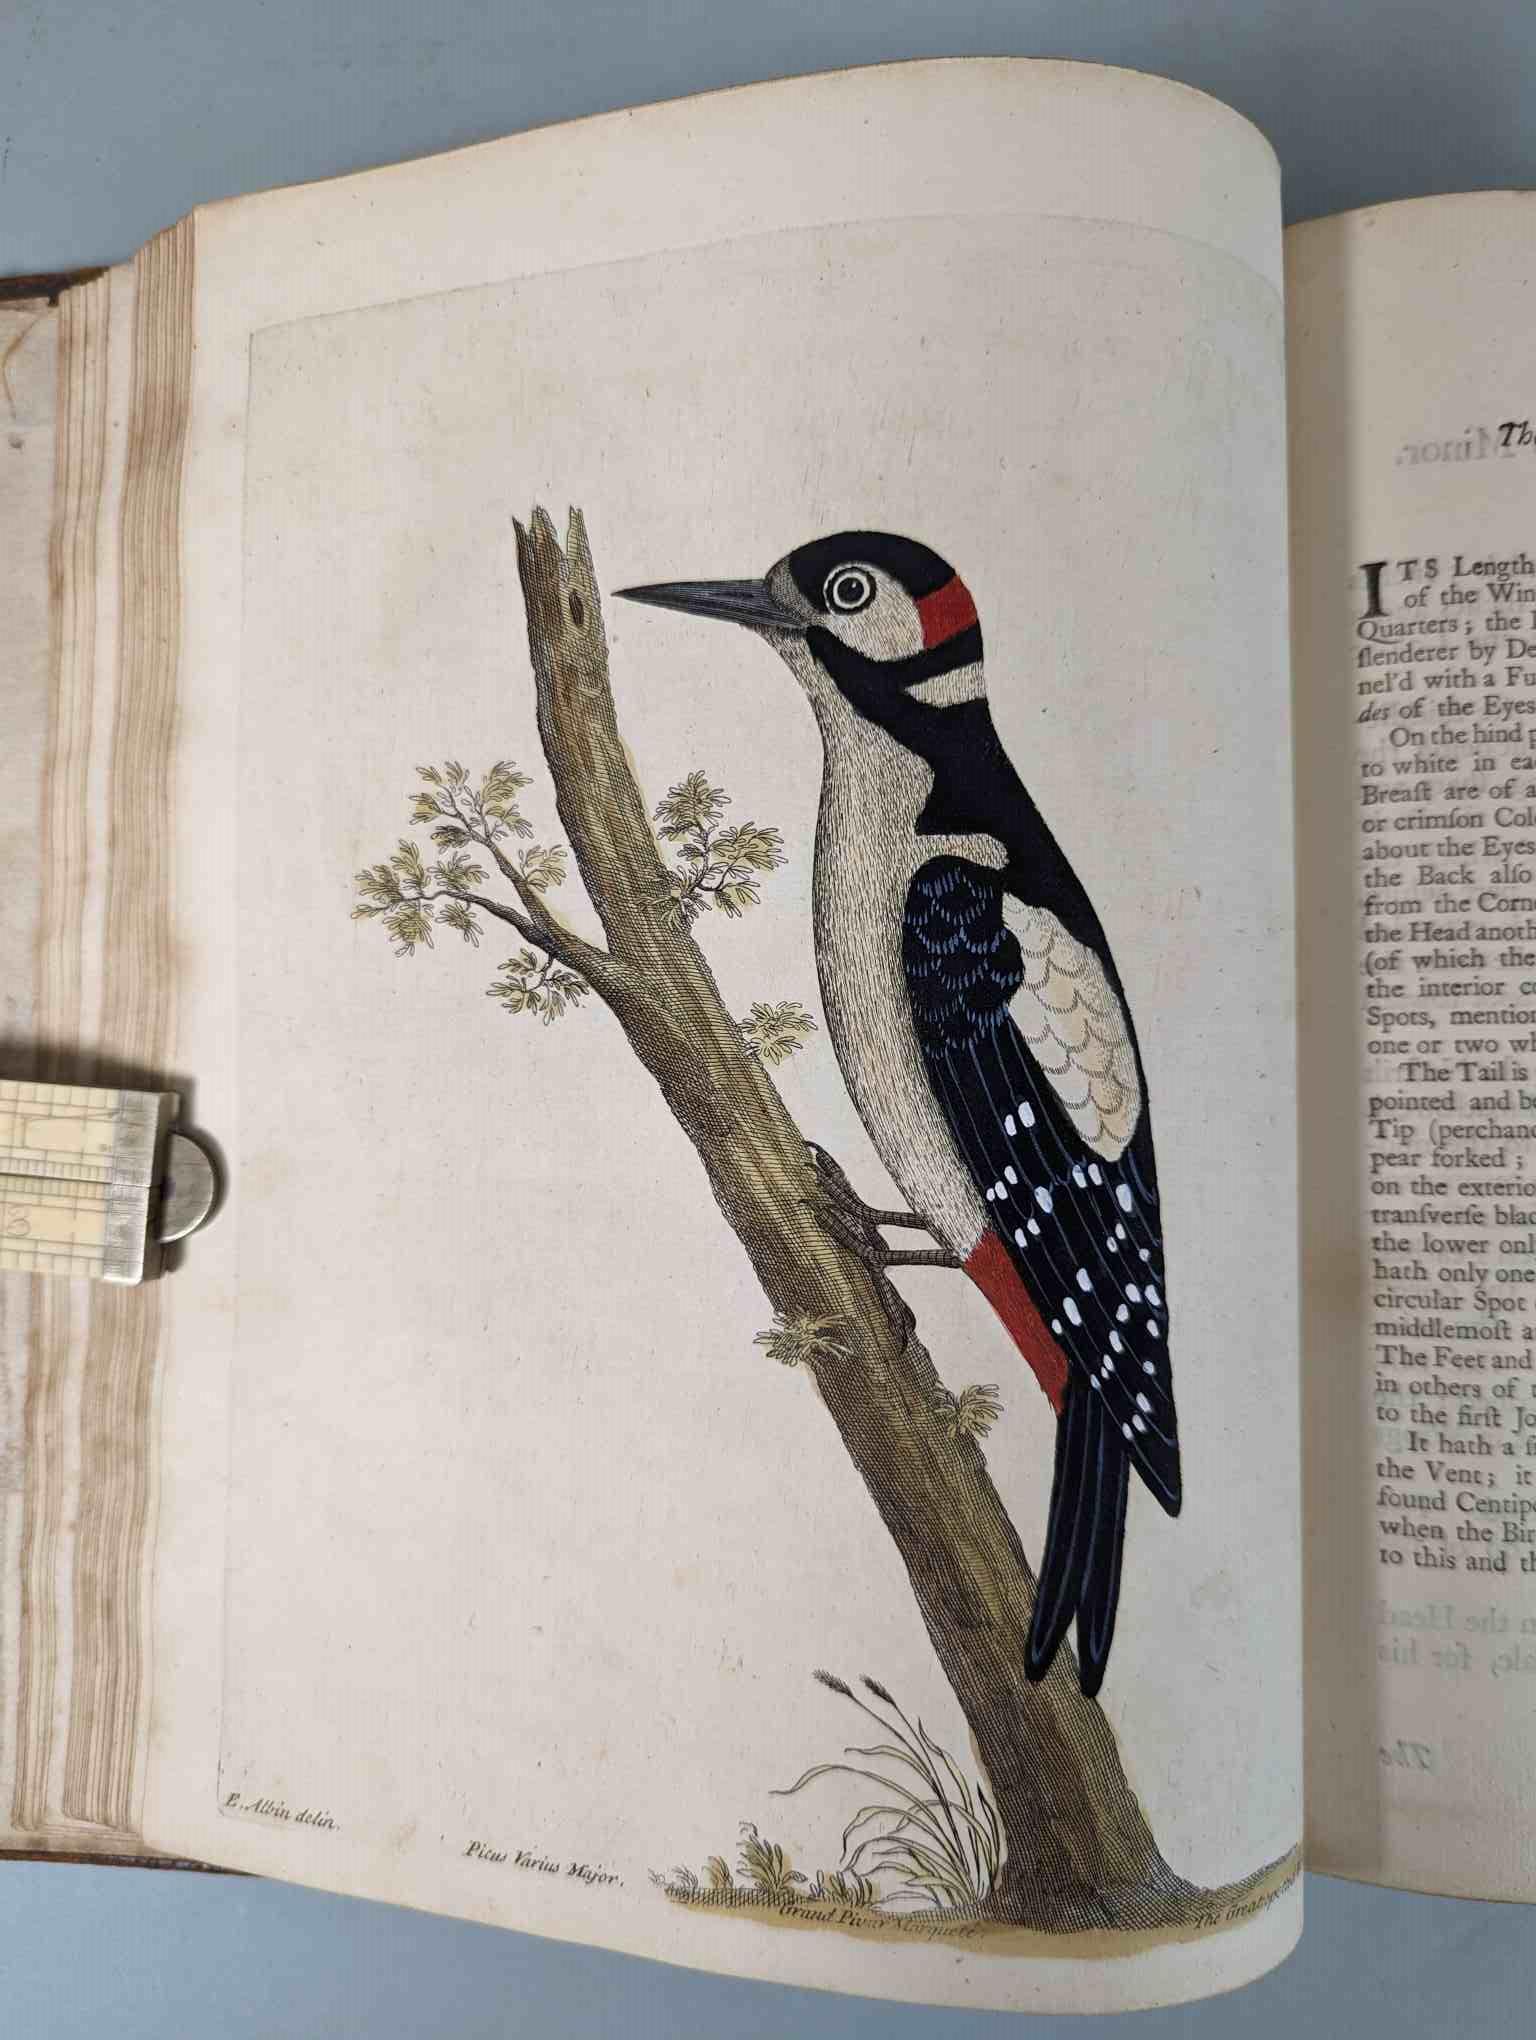 ALBIN, Eleazar. A Natural History of Birds, to which are added, Notes and Observations by W. - Image 22 of 208